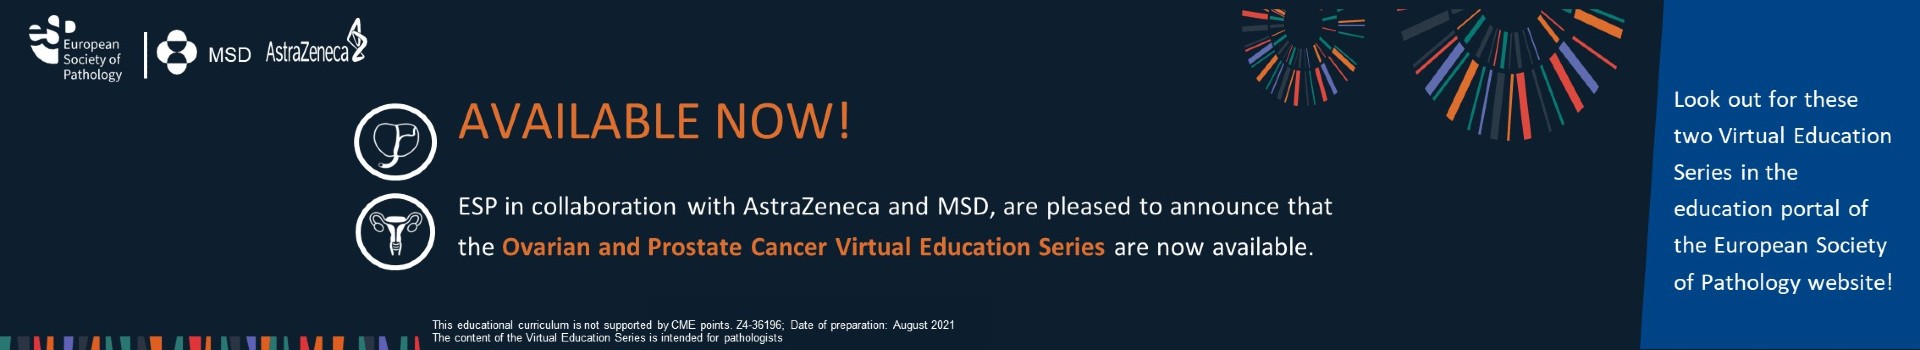 Ovarian and Prostate Cancer Virtual Education Series - now available